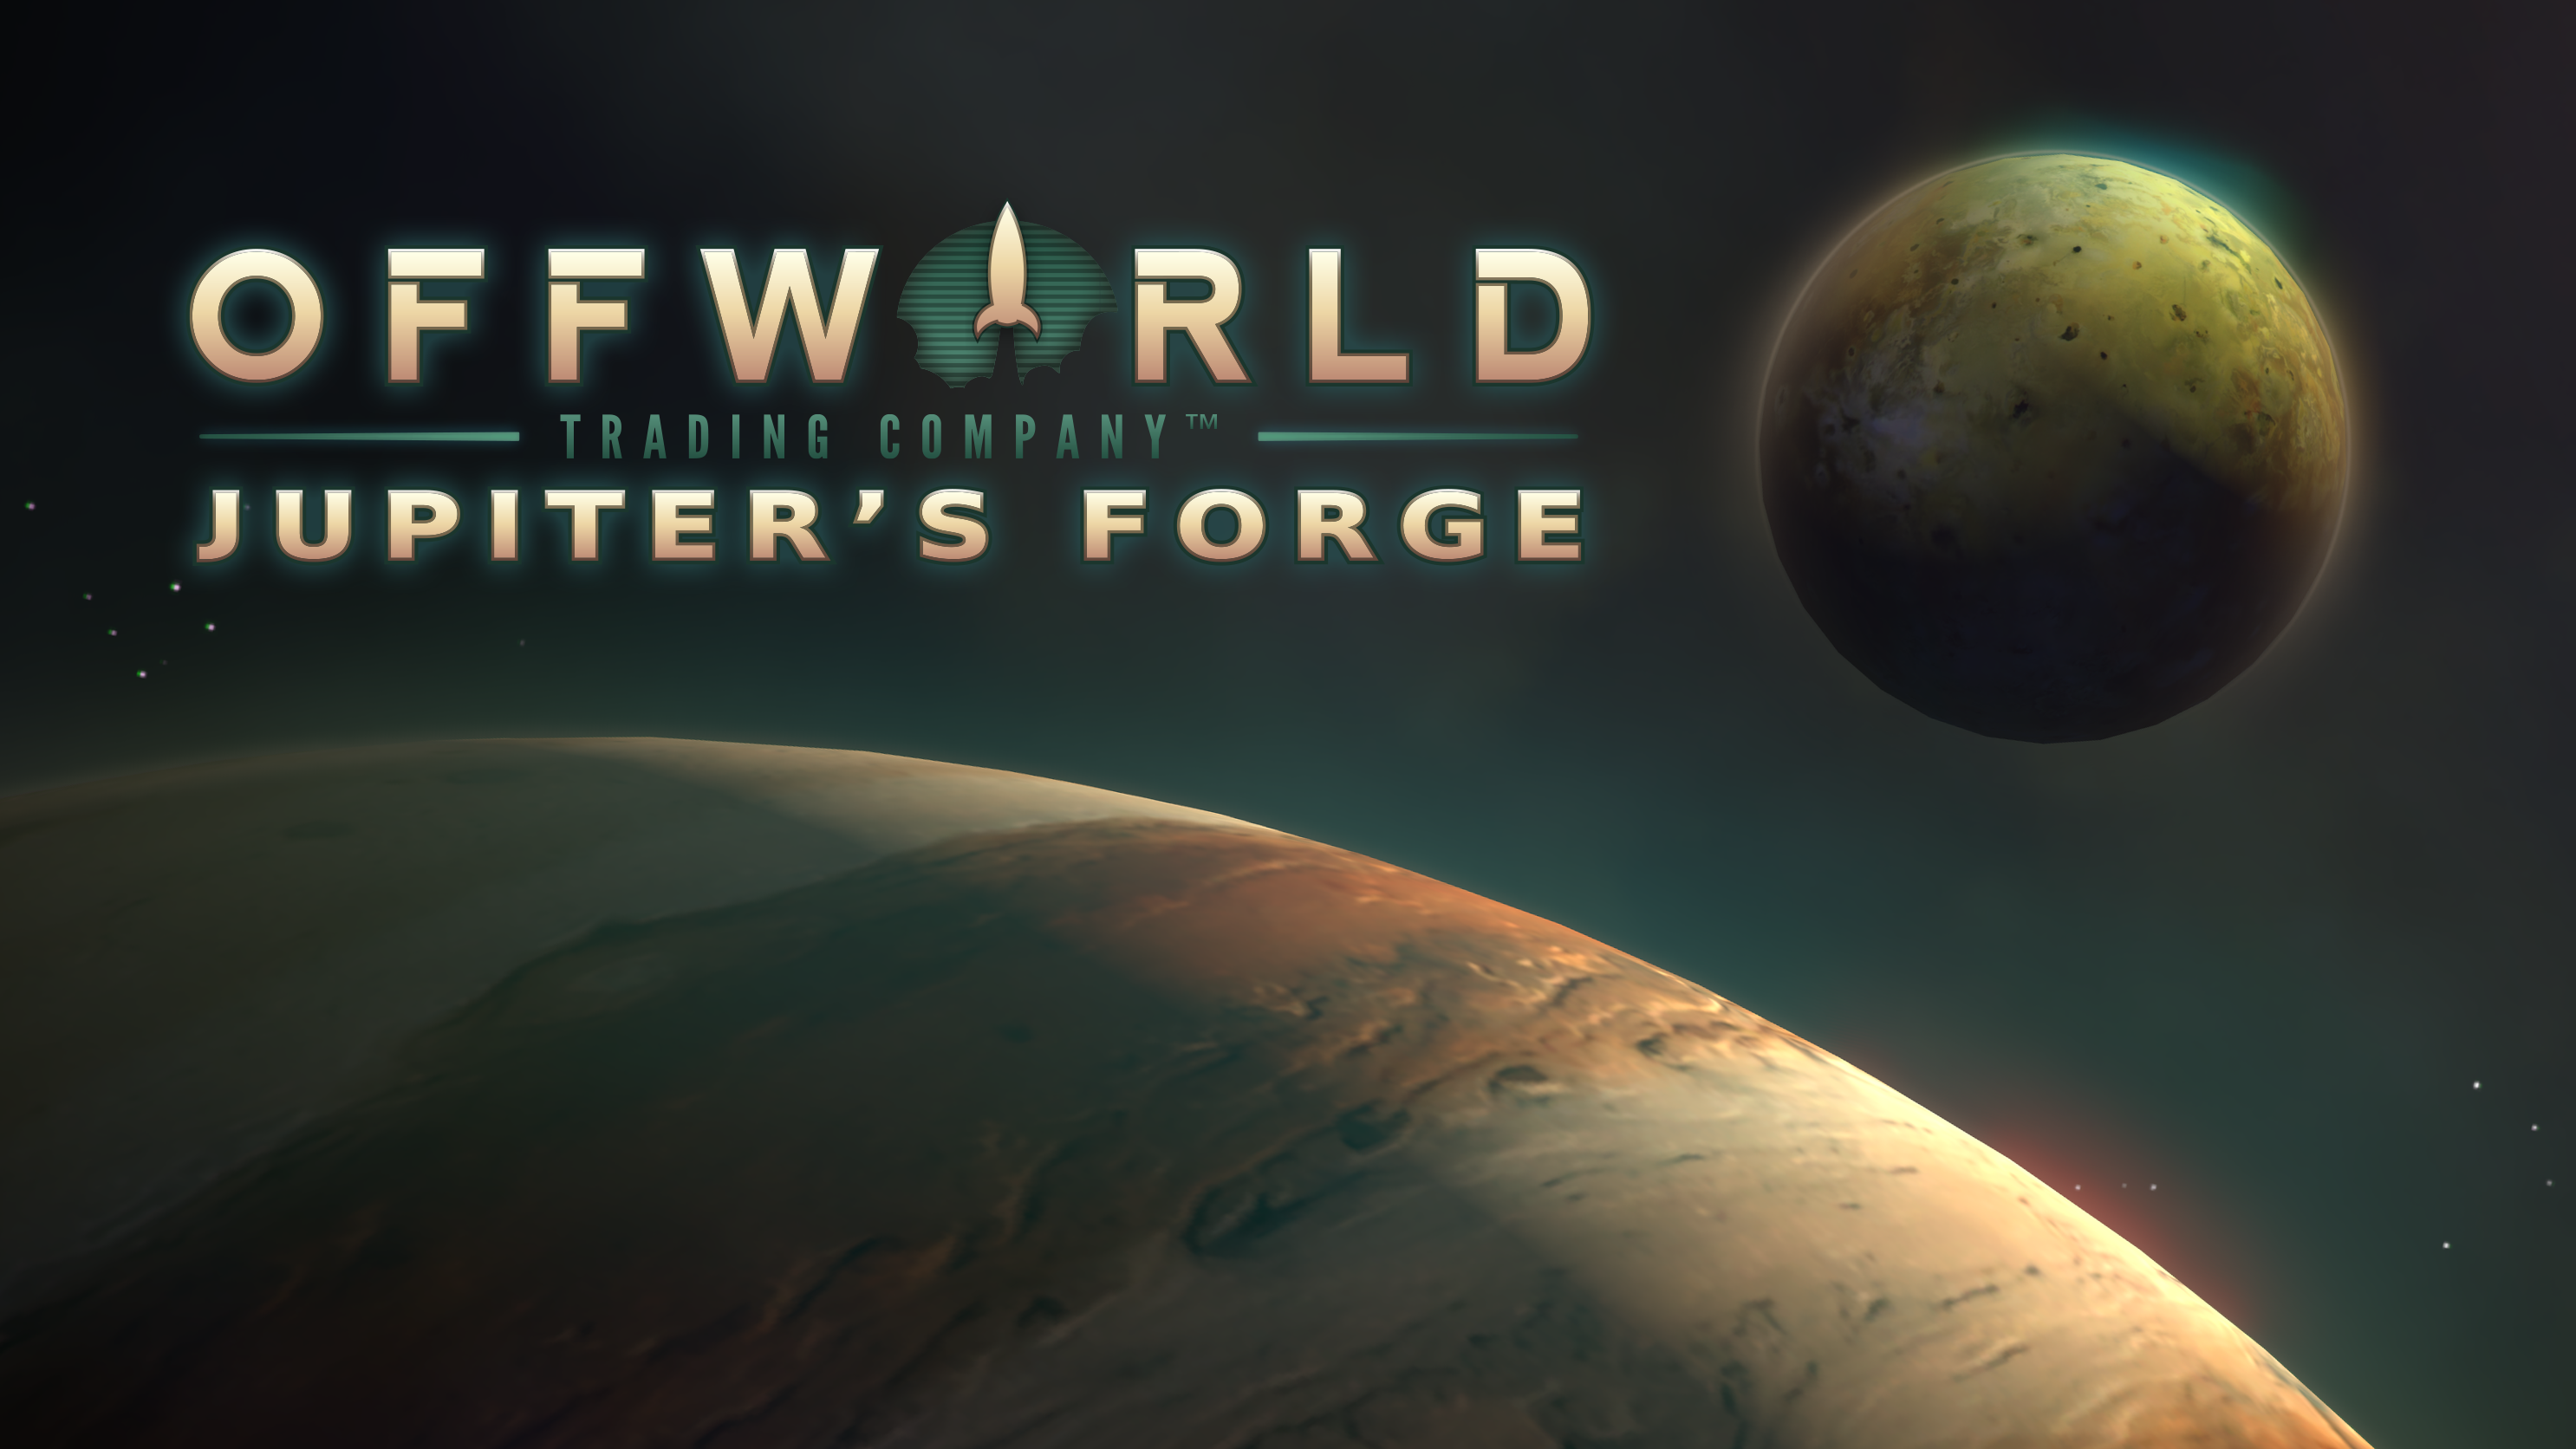 Offworld Offworld Trading Company Real Time Strategy Loading Screen Stardock Mohawk Games PCMR PC Ga 2972x1672